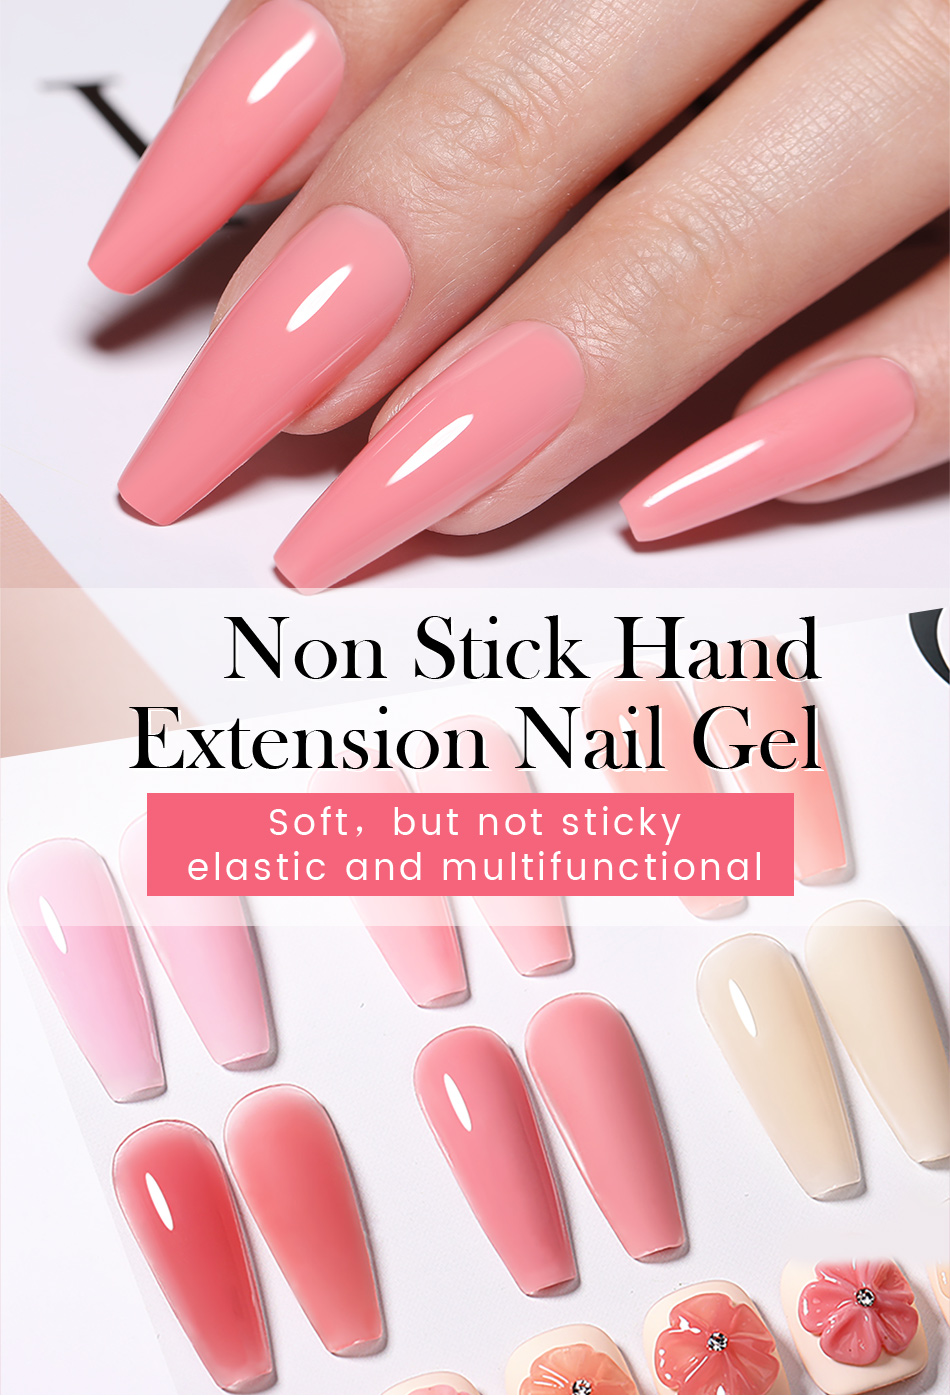 Non Stick Nail Extension Gel, Acrylic Hand Extension Gel